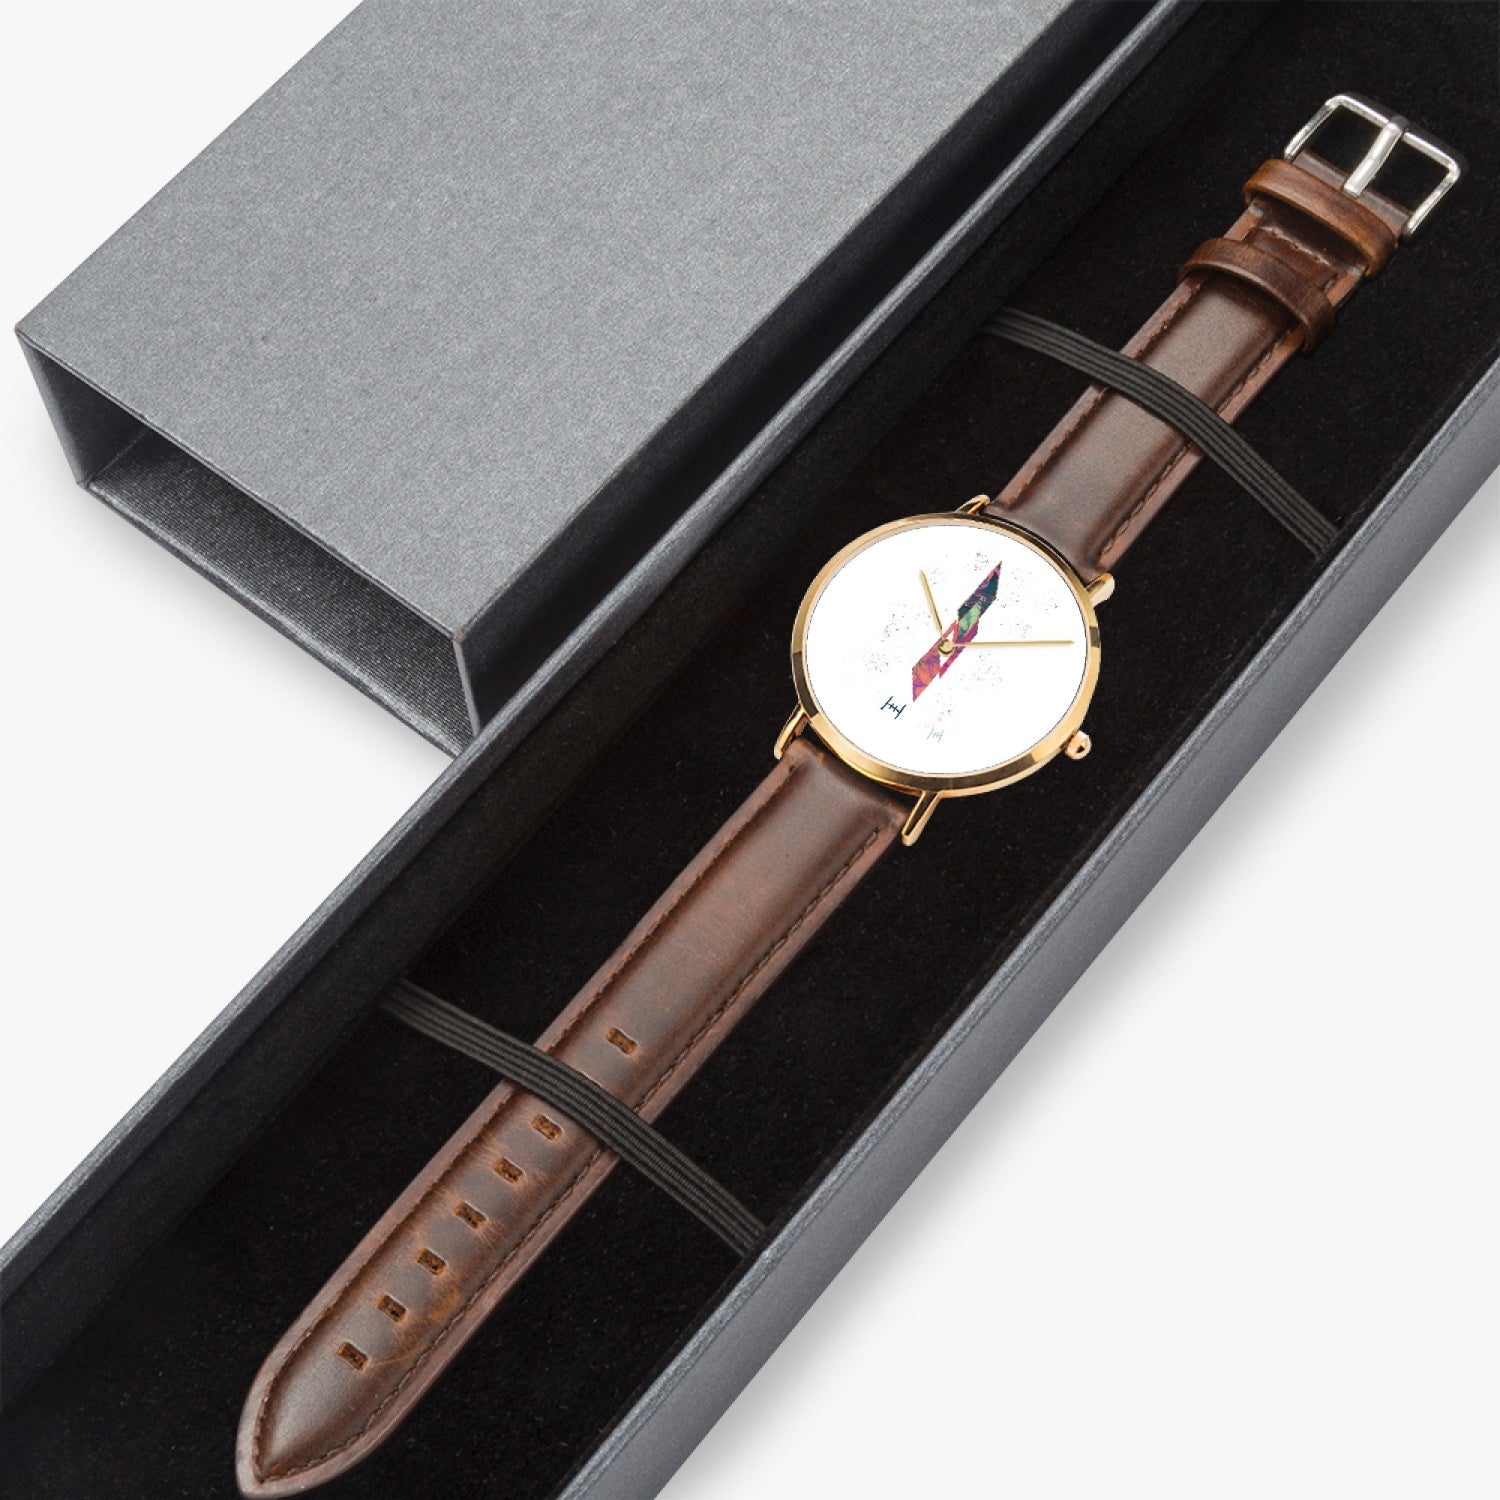 HH Hot Selling Ultra-Thin Leather Strap Quartz Watch (Rose Gold) - Hollistic Human Shop